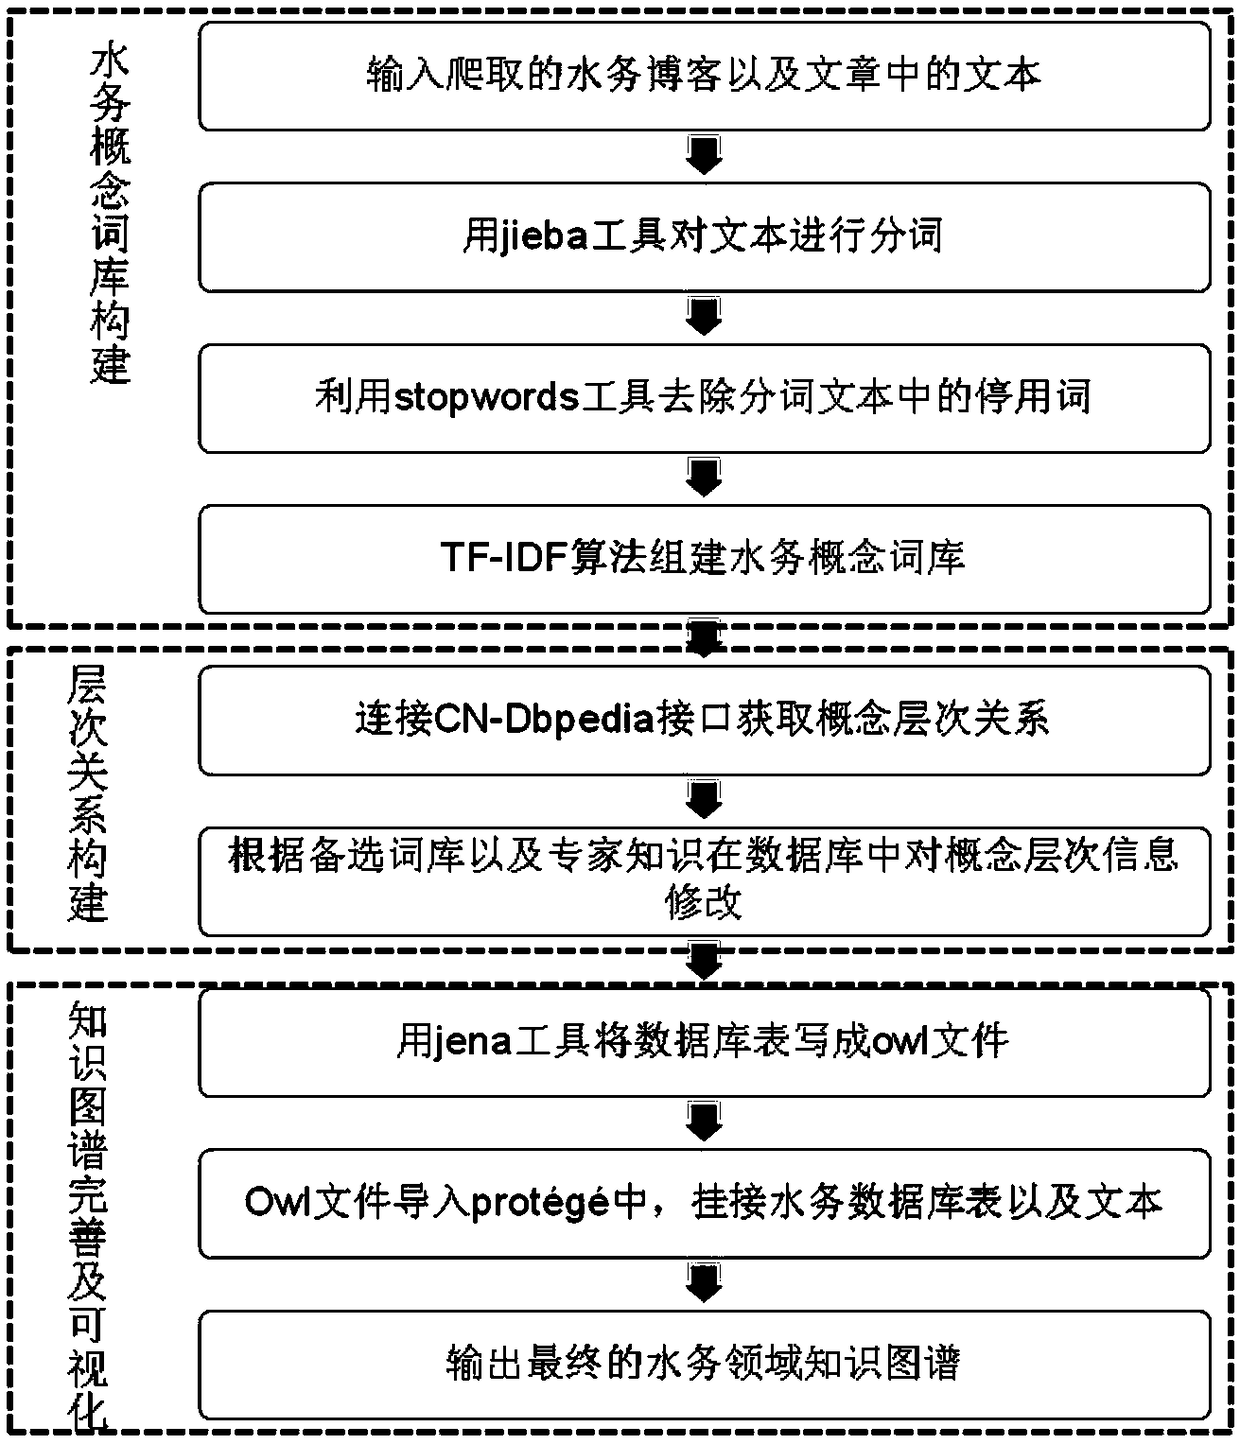 A method for constructing a knowledge map of a water affairs domain based on a Chinese text